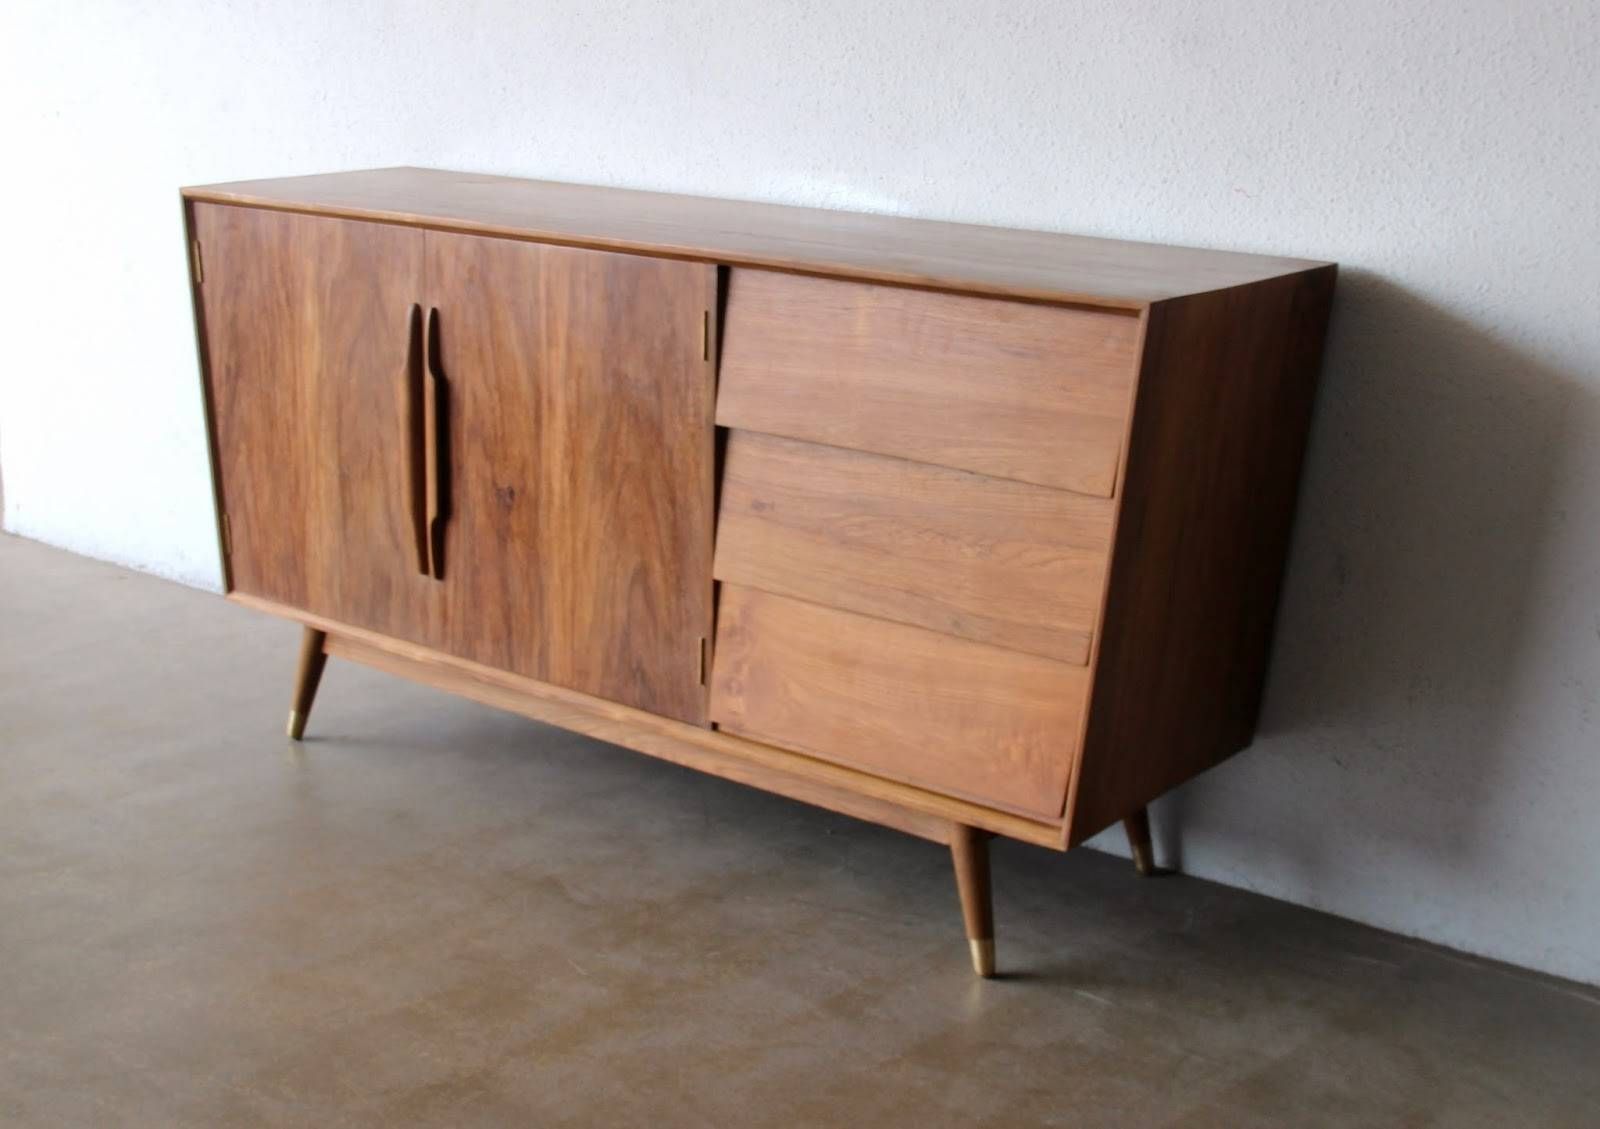 Second Charm Furniture – Mid Century Modern Influence | Bobs Furniture With Regard To 2018 Mid Century Modern Sideboards (Photo 11 of 15)